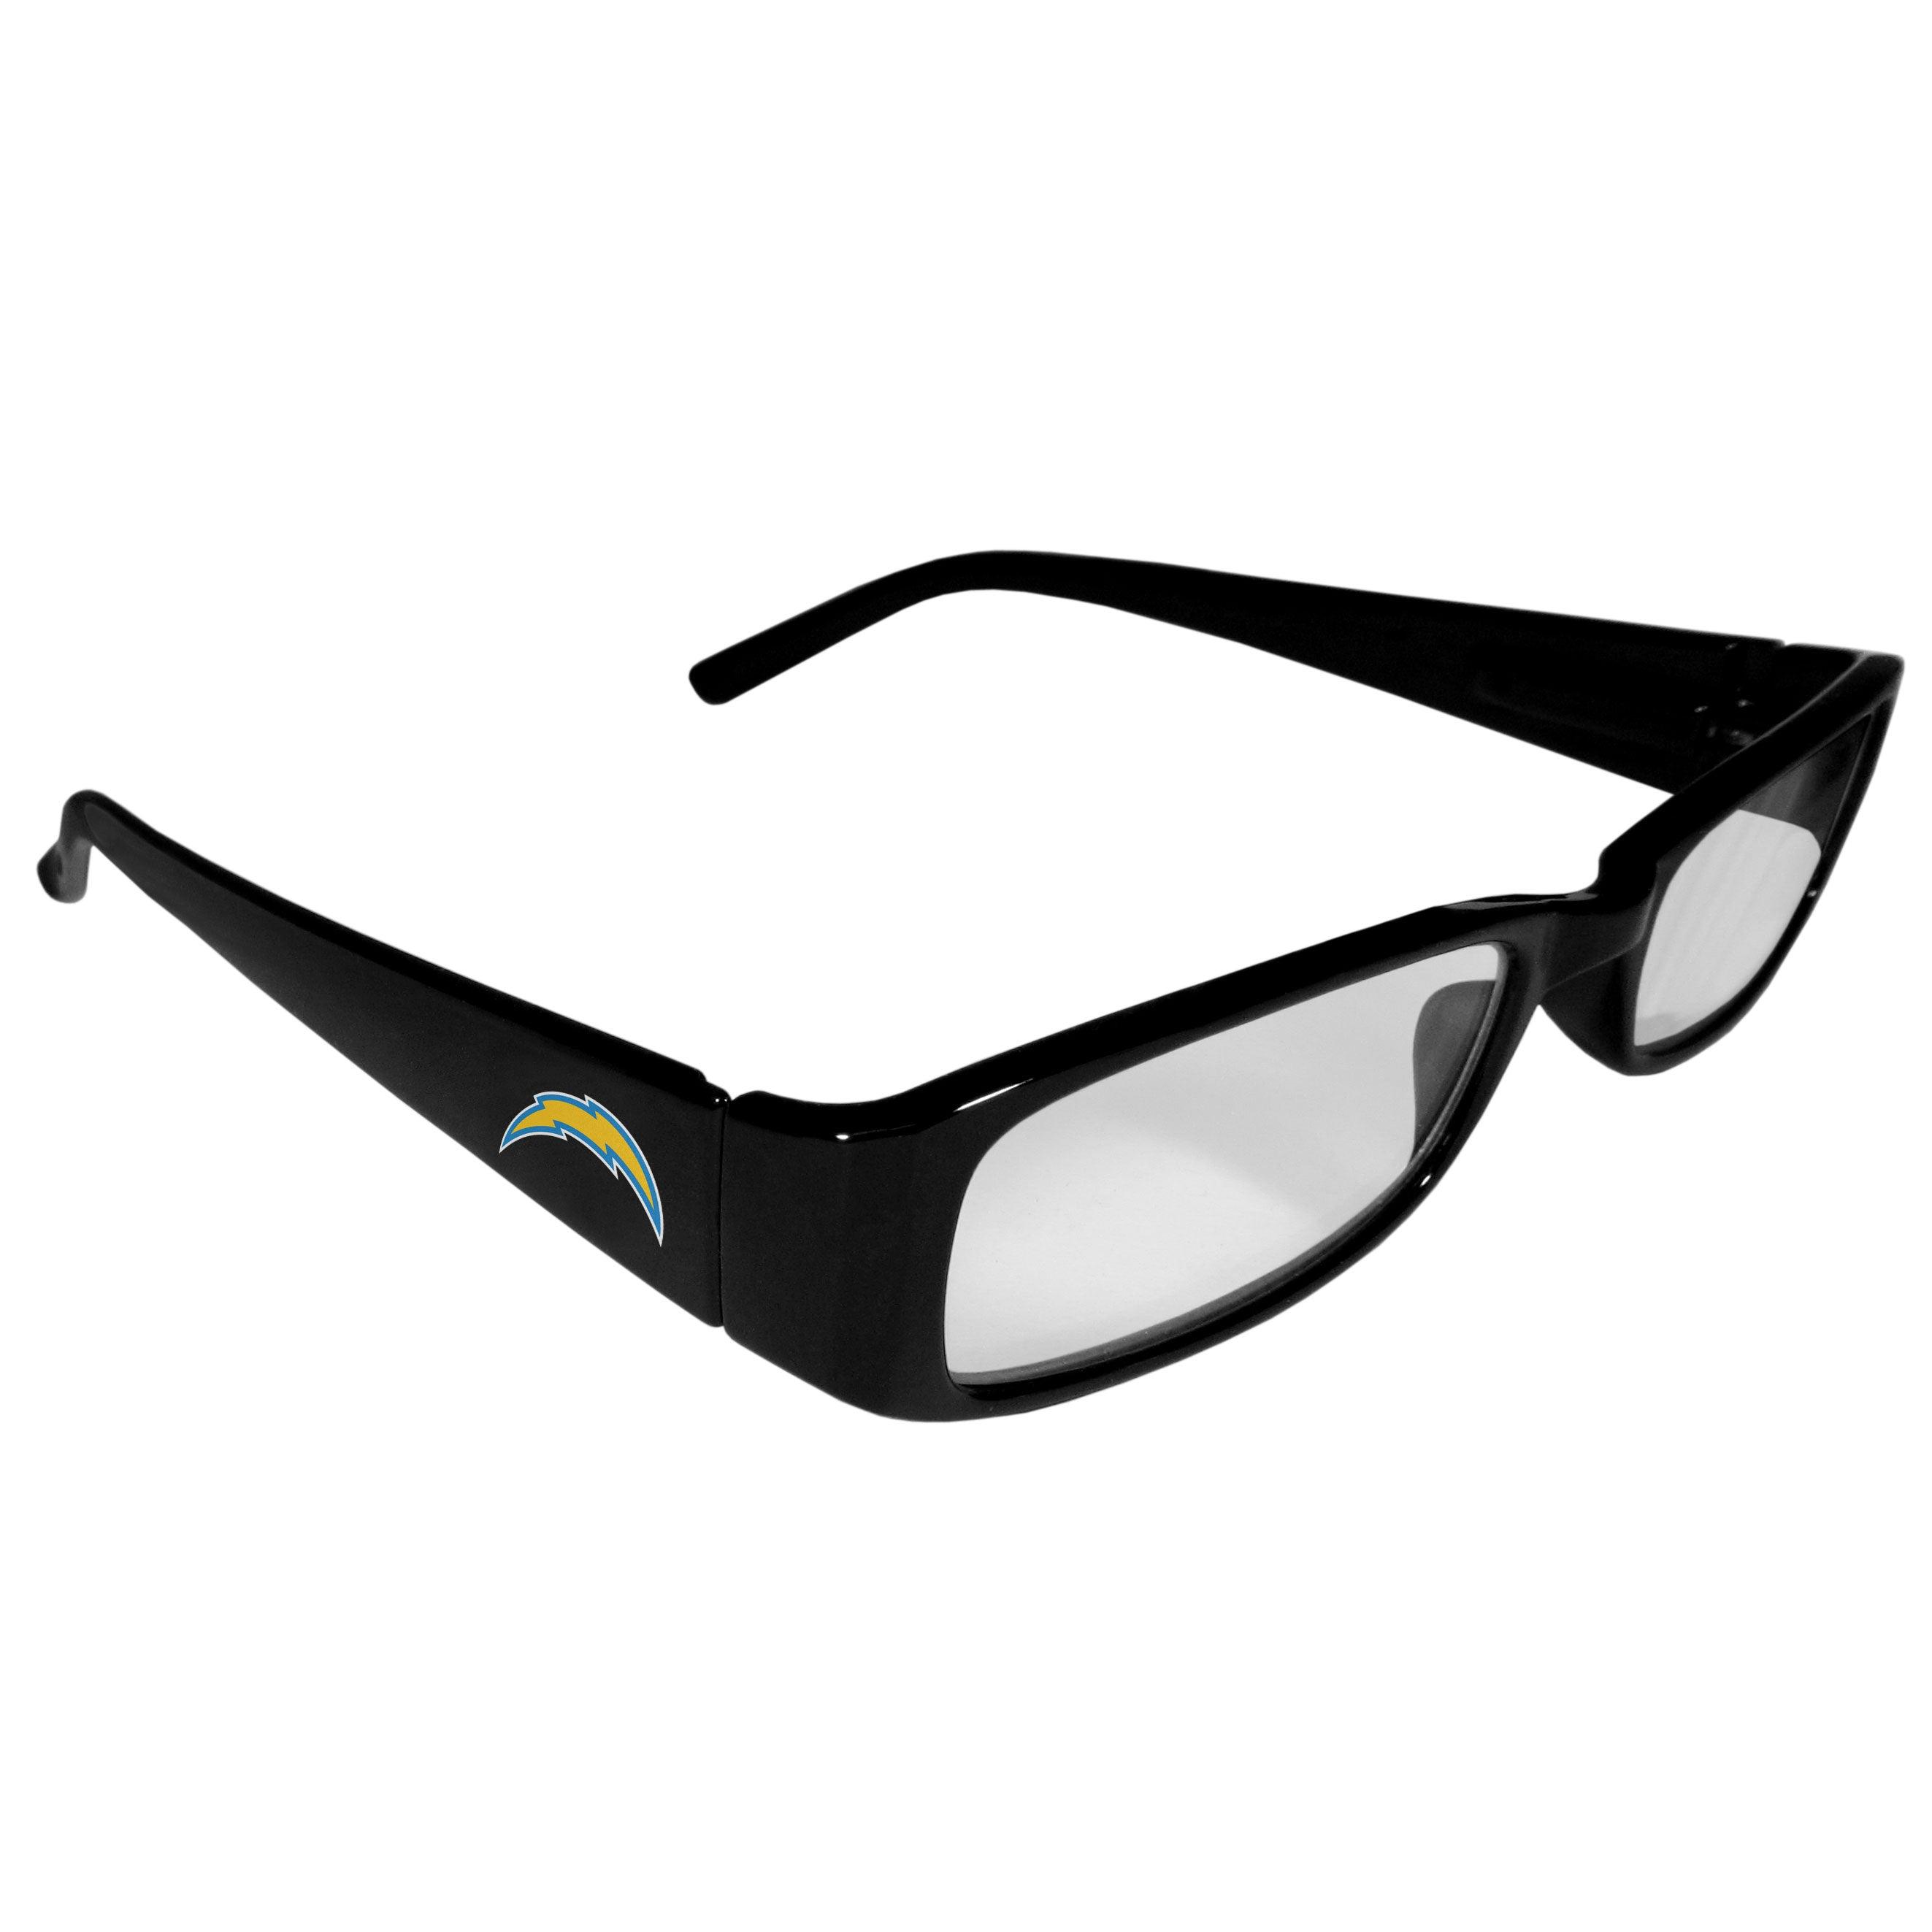 Los Angeles Chargers Printed Reading Glasses, +2.25 - Flyclothing LLC